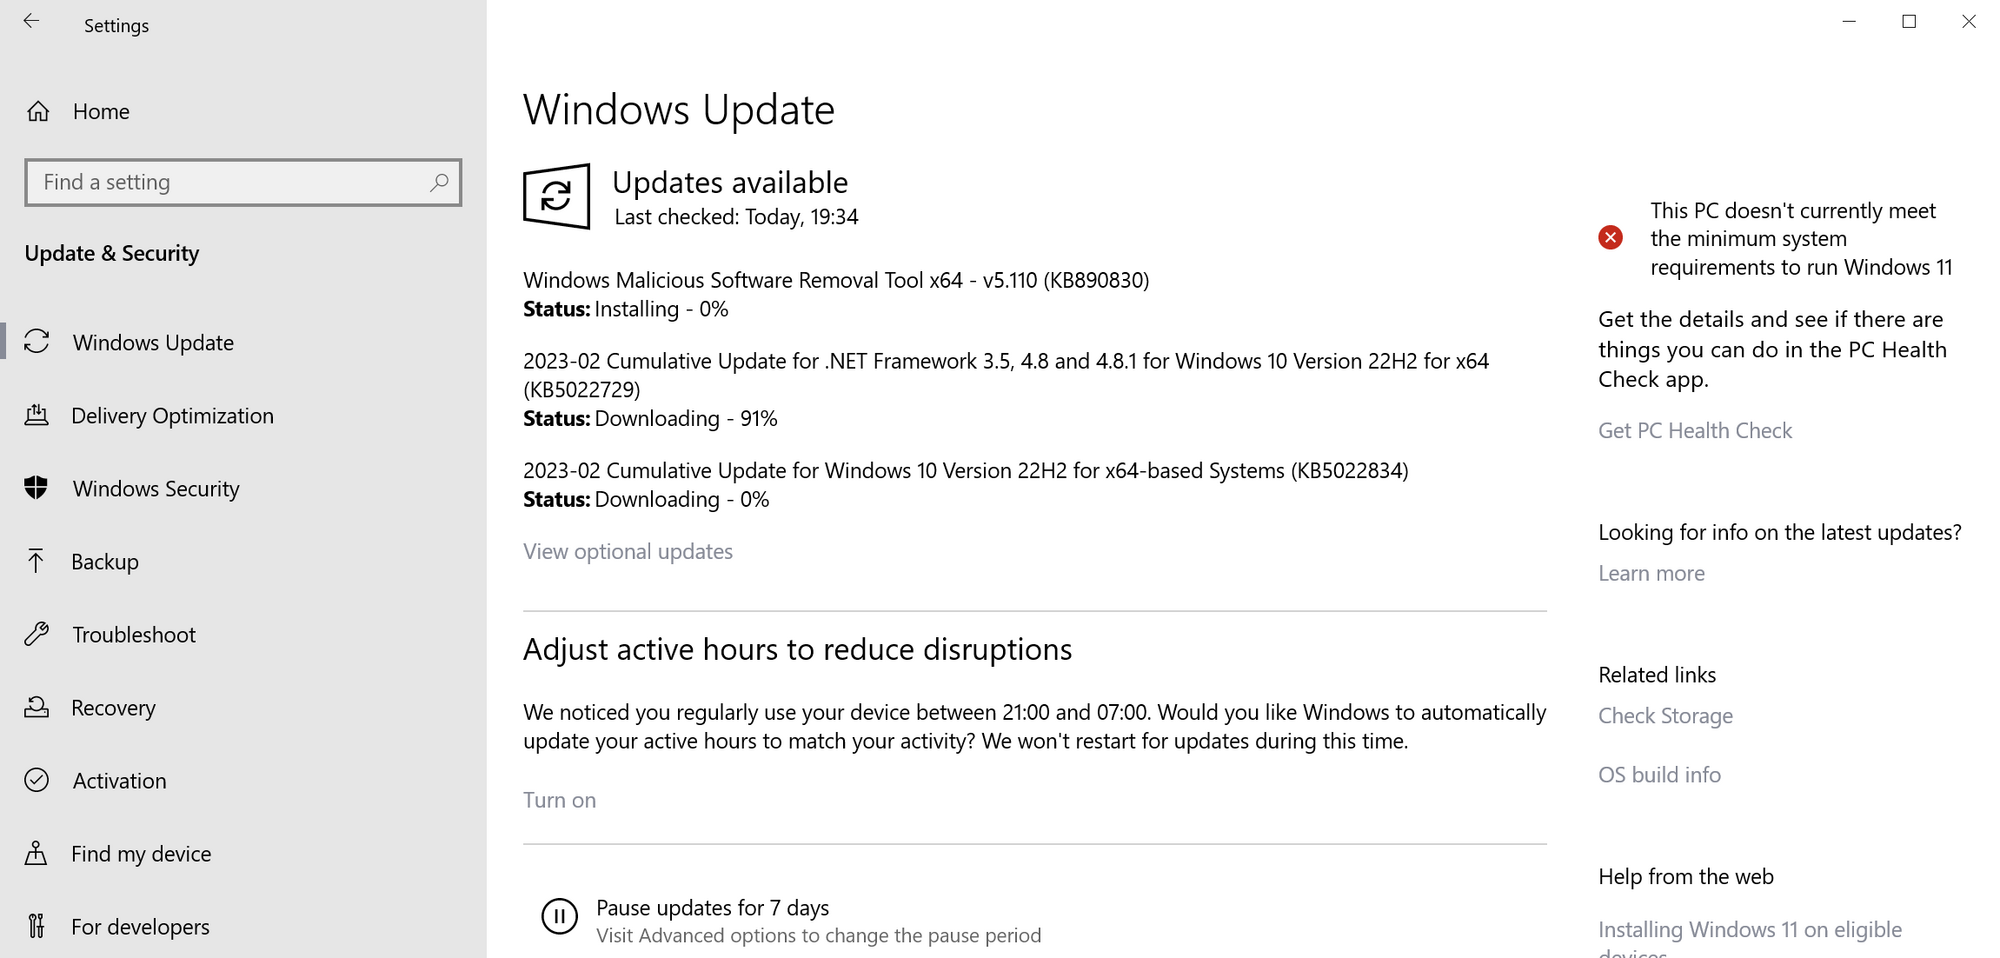 Windows Security: time to patch these three zero-day vulnerabilities windows-security-updates-february-2023.png